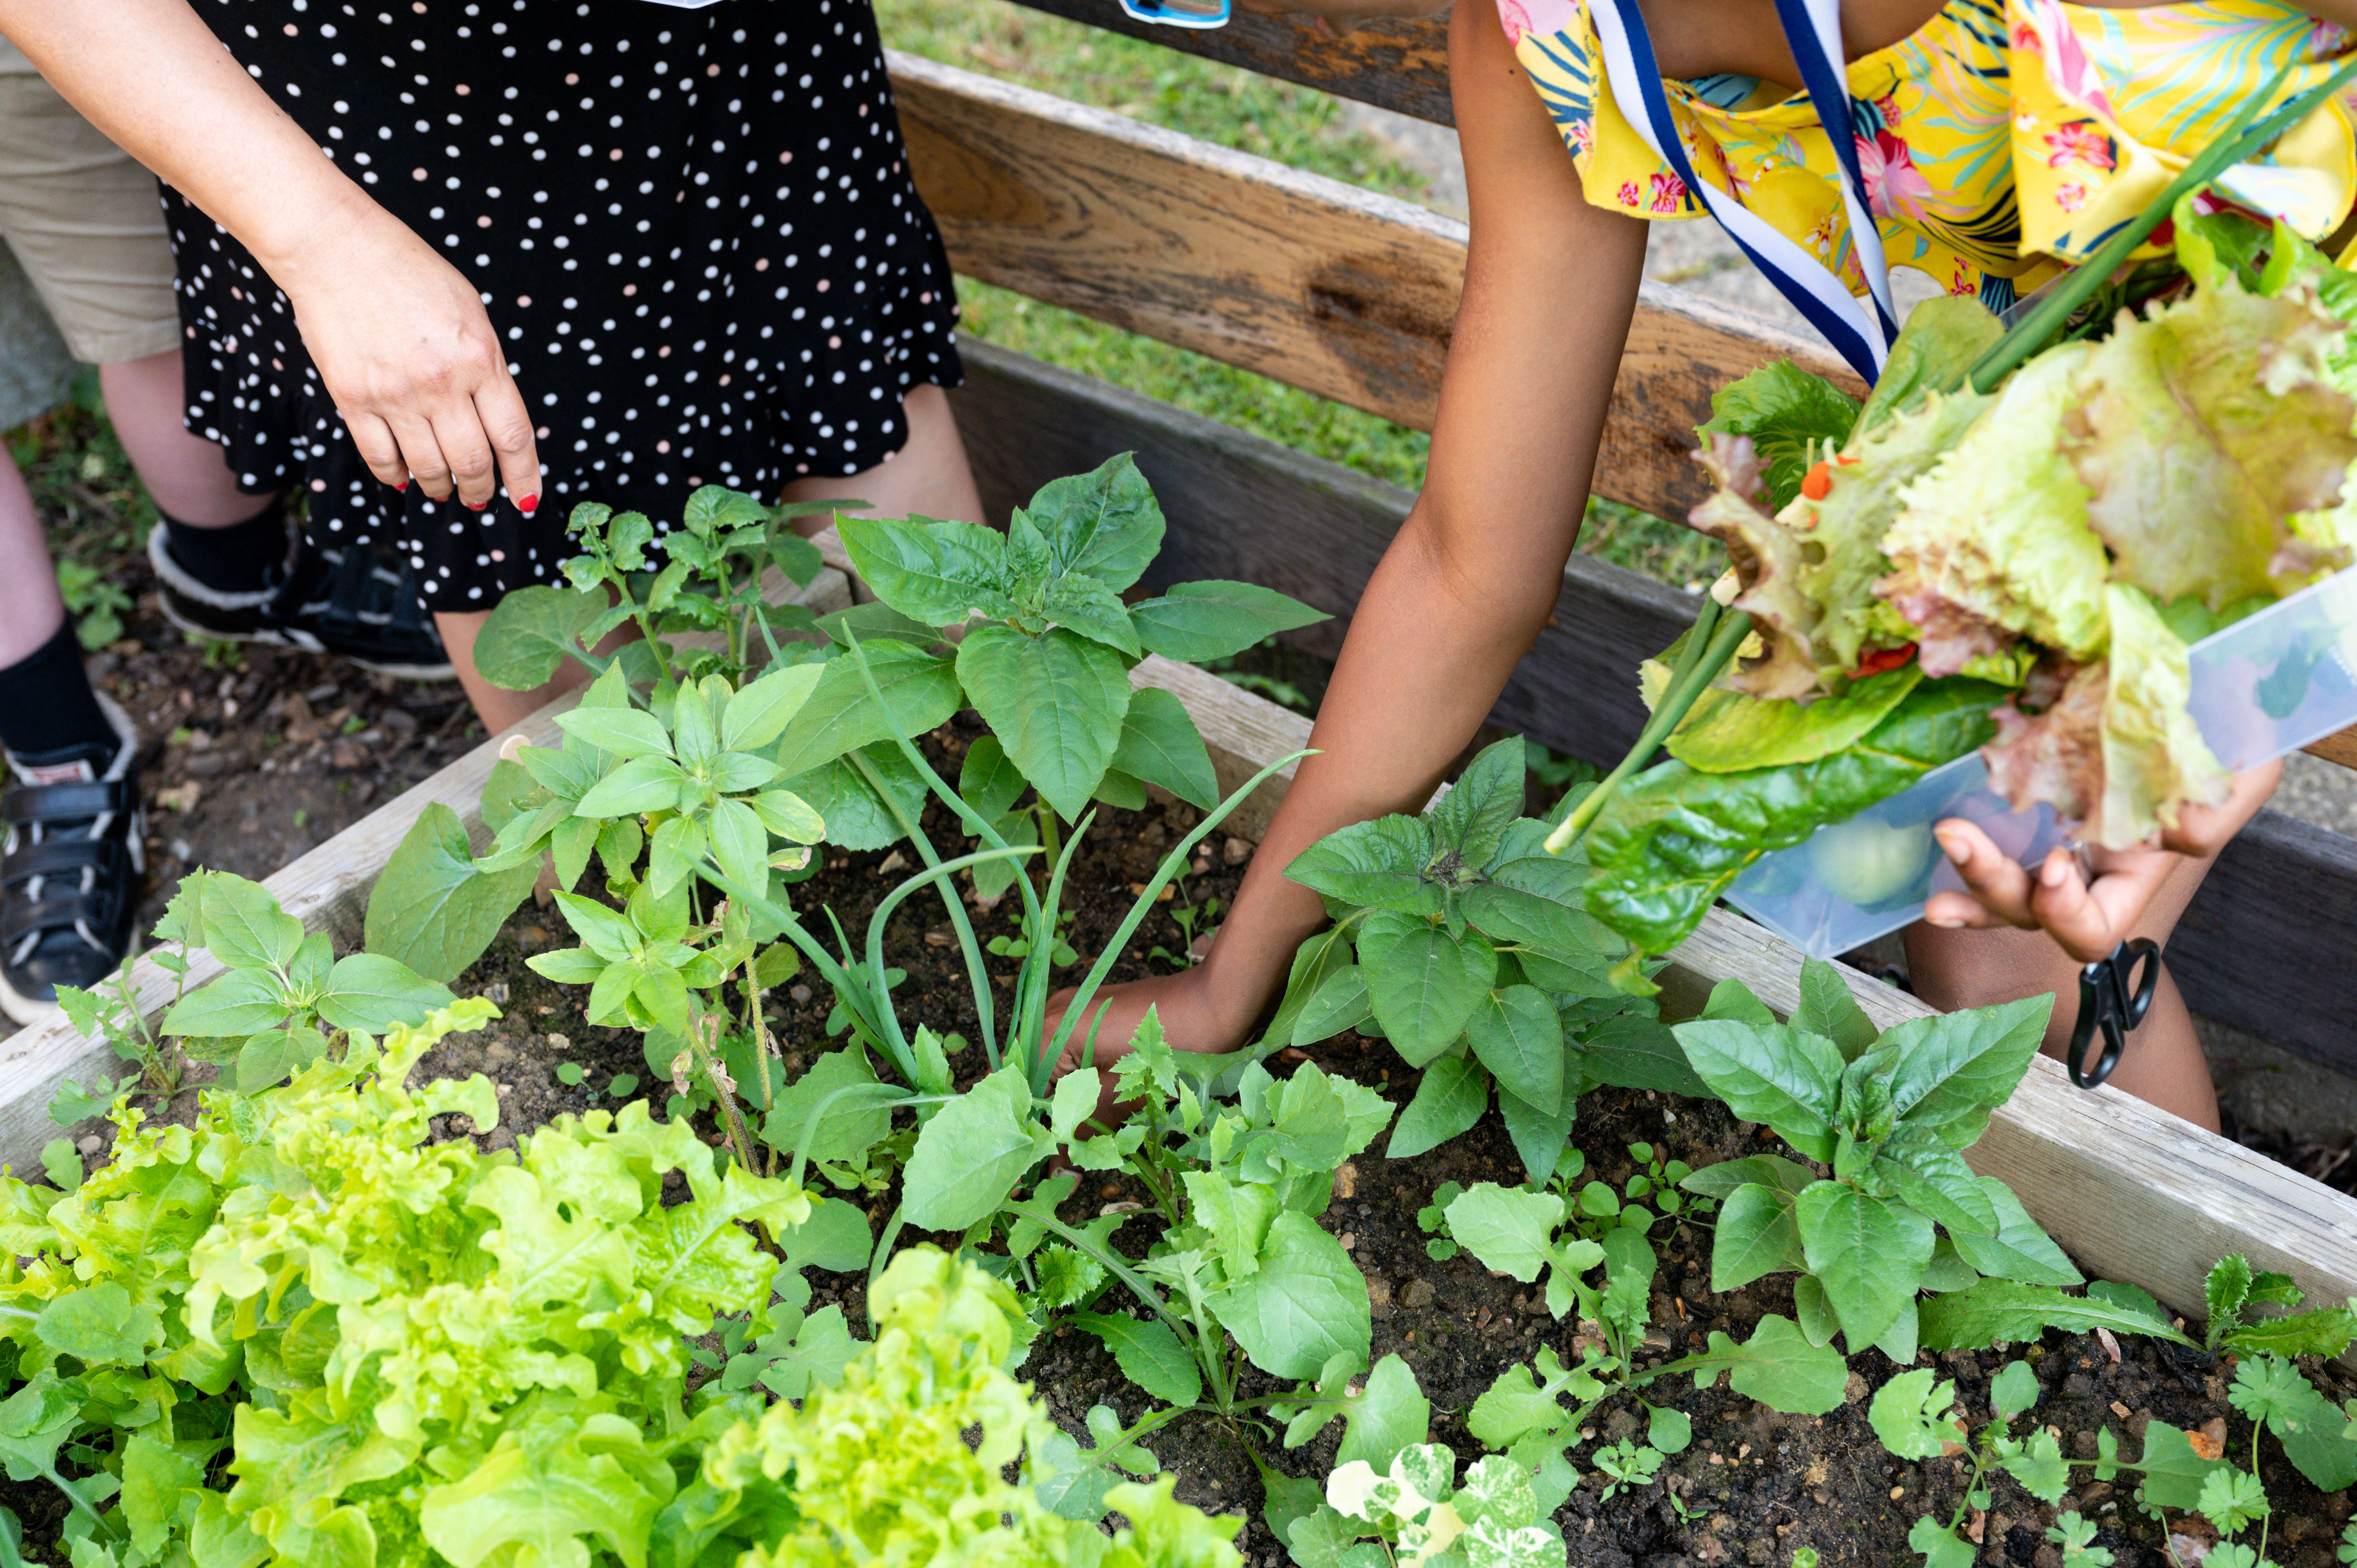 A young person picking herbs from a raised bed